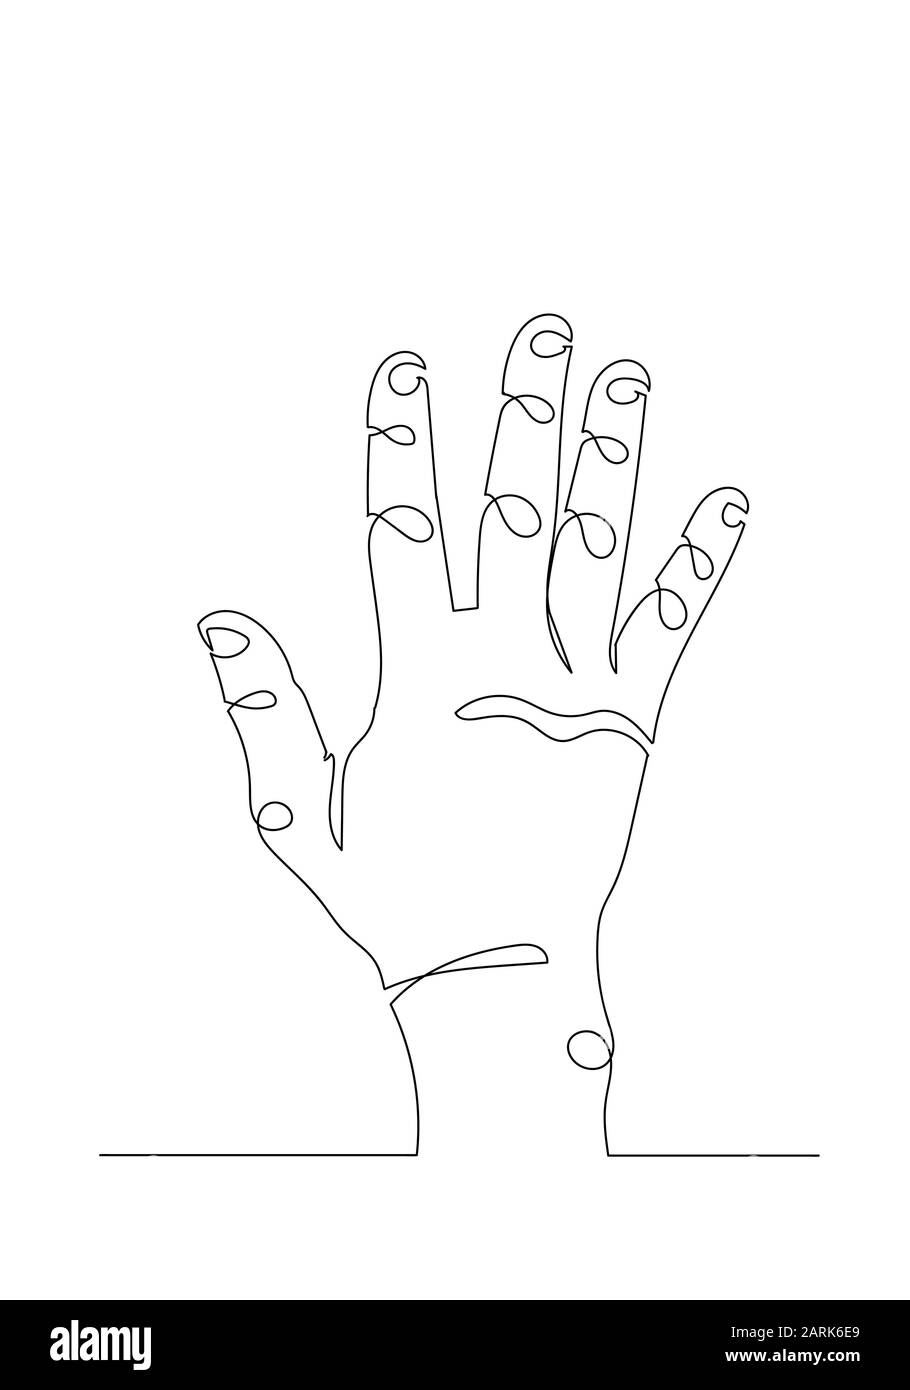 continuous line drawing of a hand holding five fingers waving gesture Stock Photo